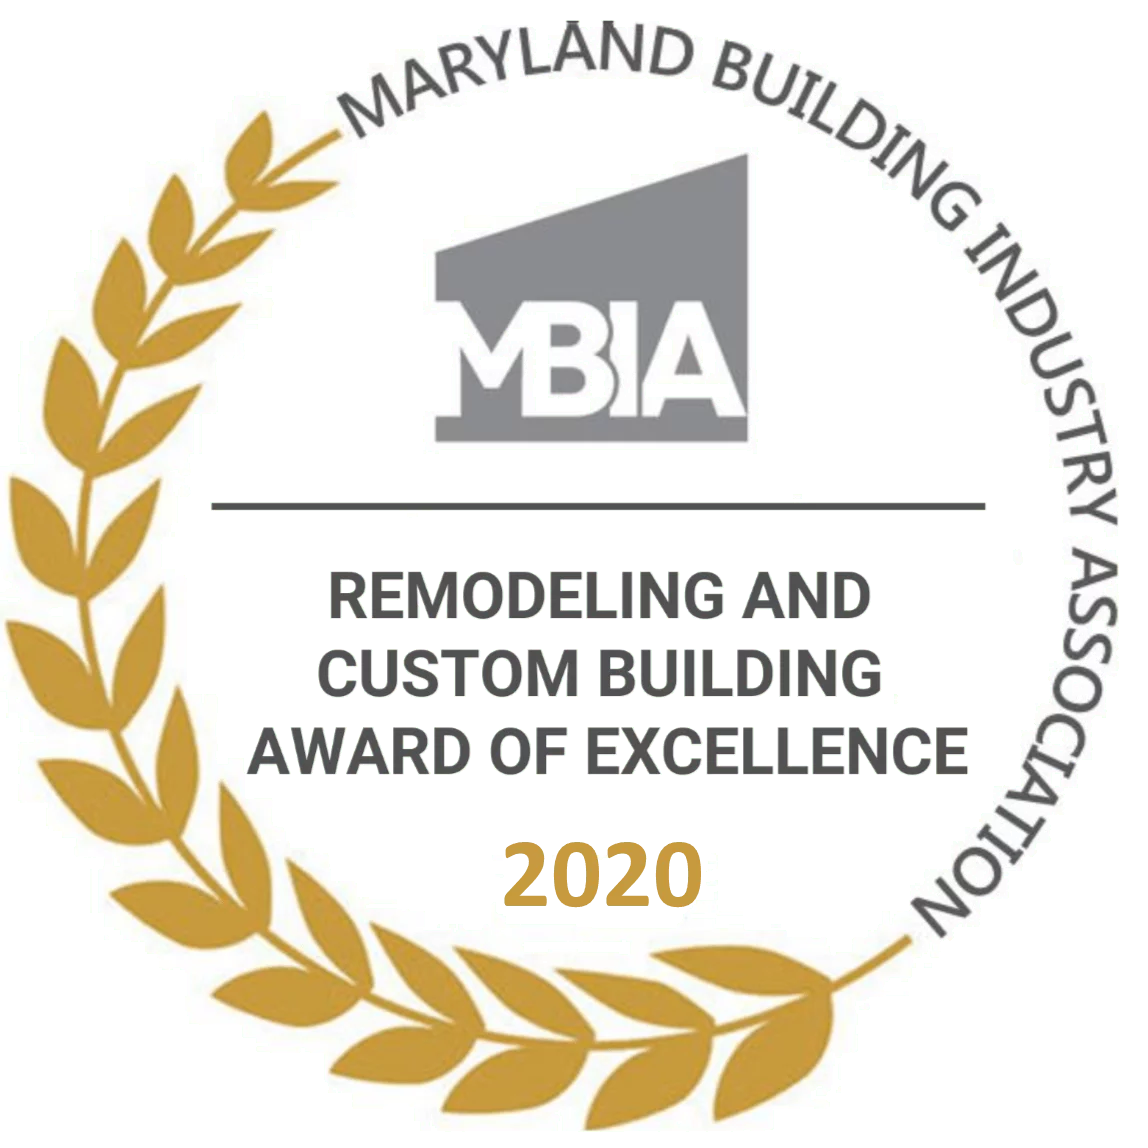 Awards of excellence 2020